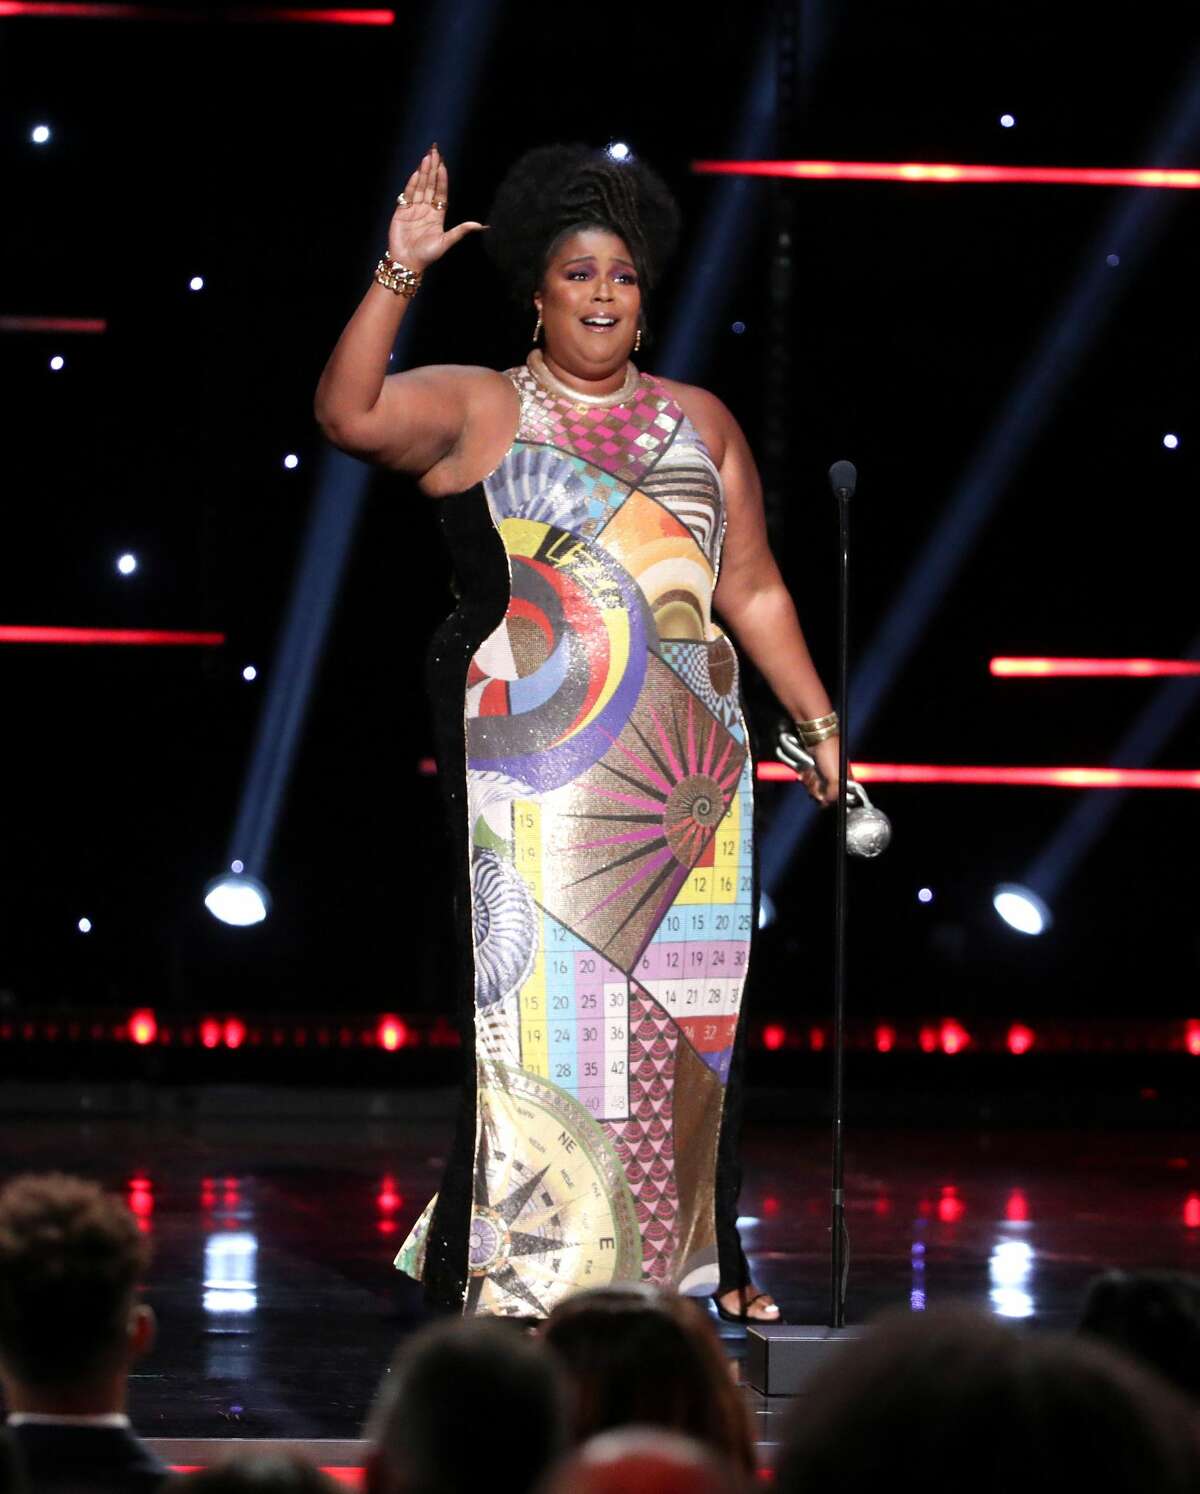 PASADENA, CALIFORNIA - FEBRUARY 22: Lizzo accepts Entertainer of the Year onstage during the 51st NAACP Image Awards, Presented by BET, at Pasadena Civic Auditorium on February 22, 2020 in Pasadena, California. (Photo by Rich Fury/Getty Images)